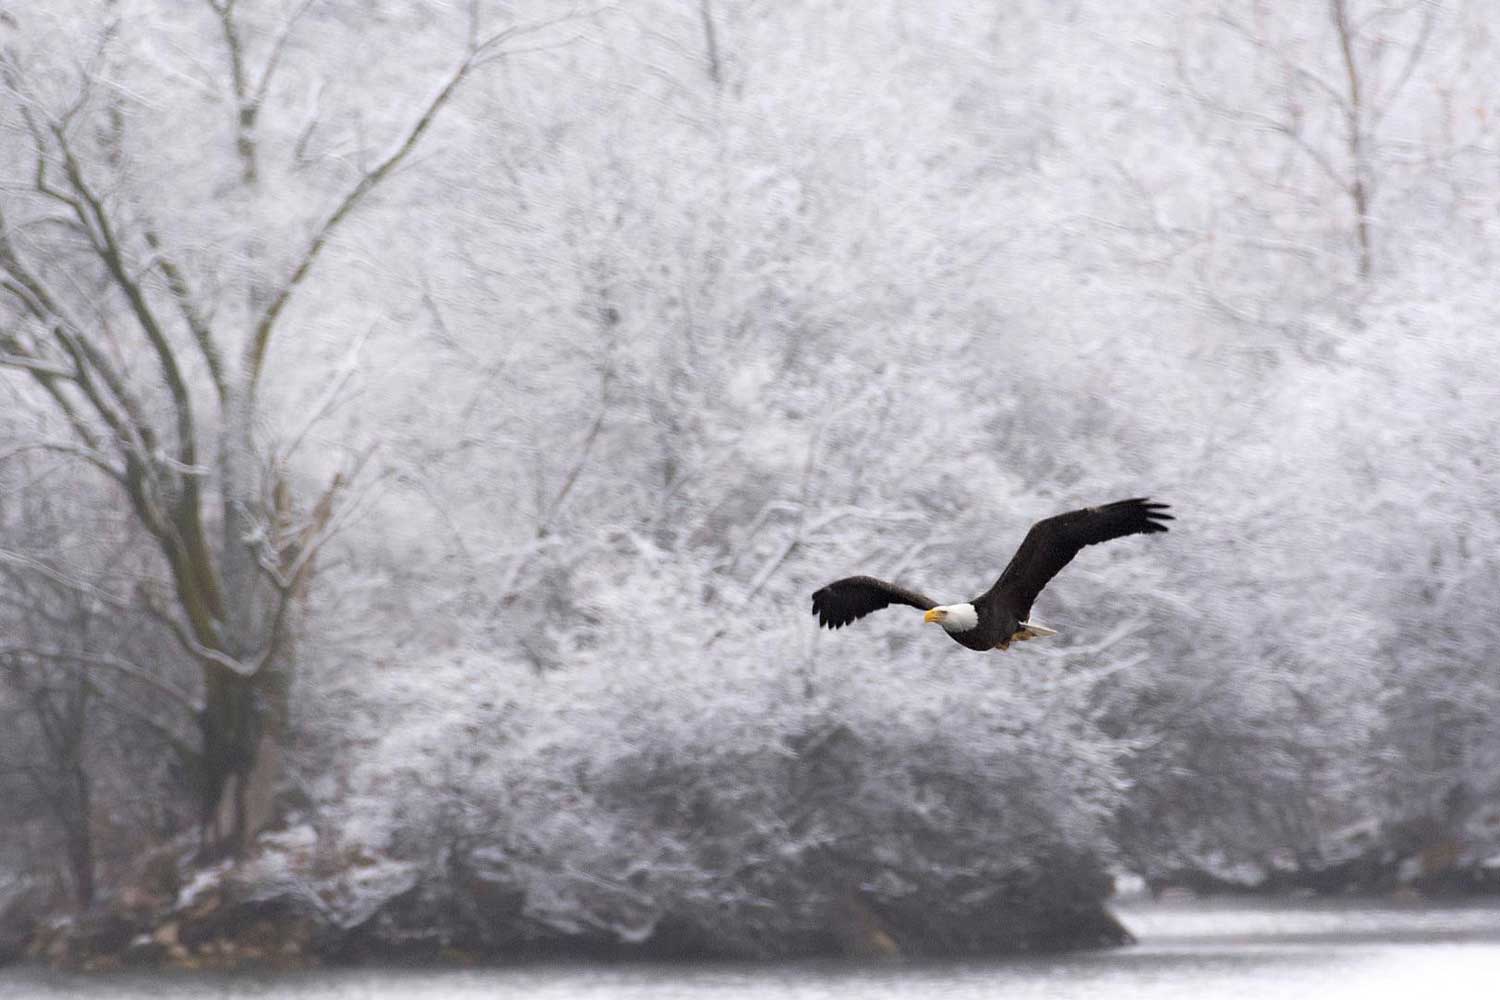 A bald eagle in flight with a winter forest in the background.